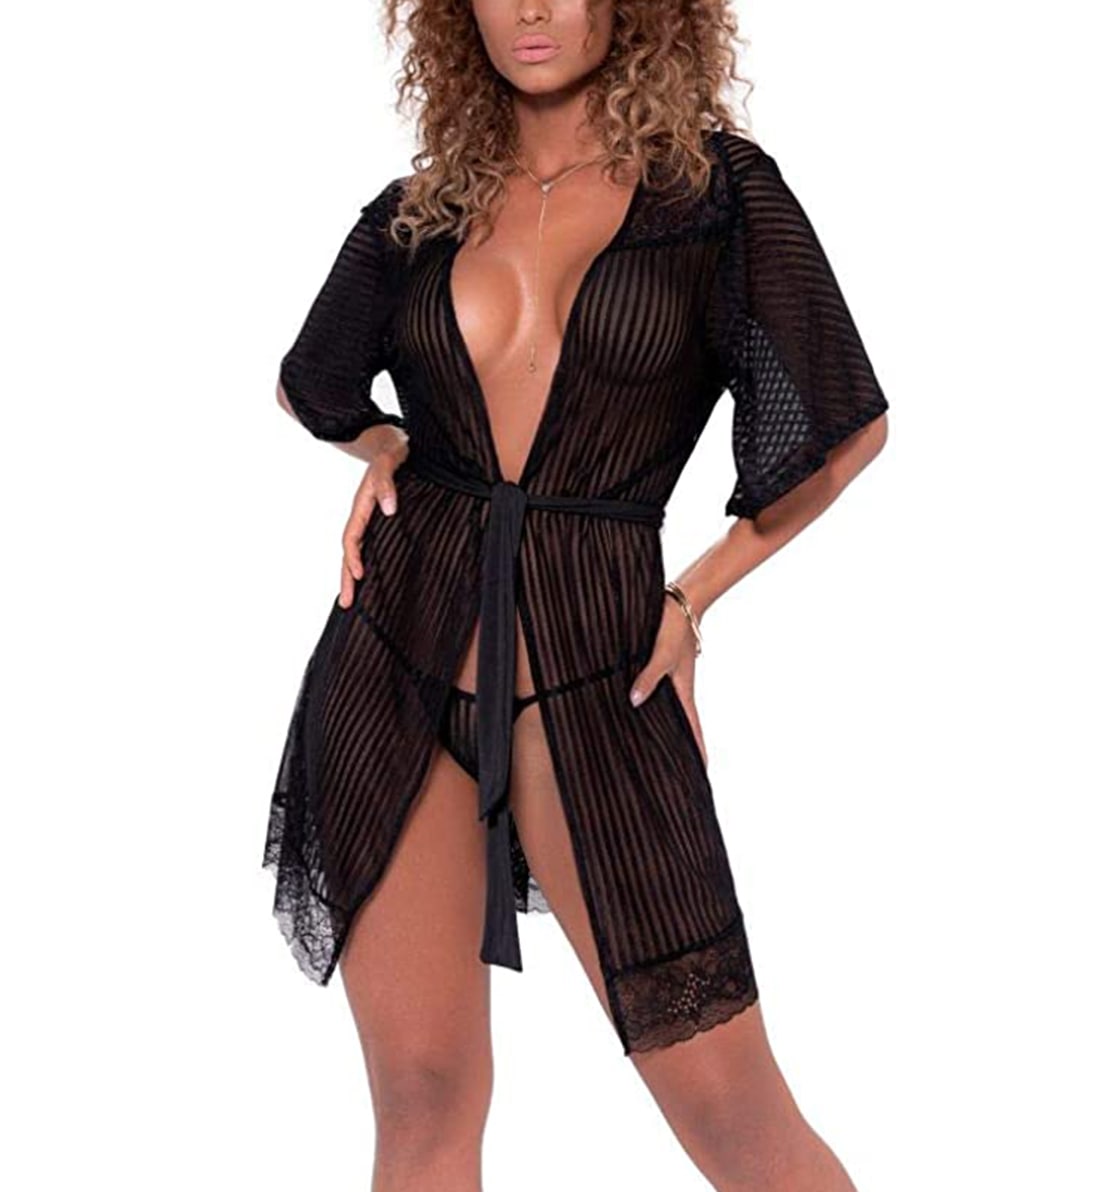 Mapale Sheer Striped Robe with Matching G-String (8478),S/M,Black - Black,S/M